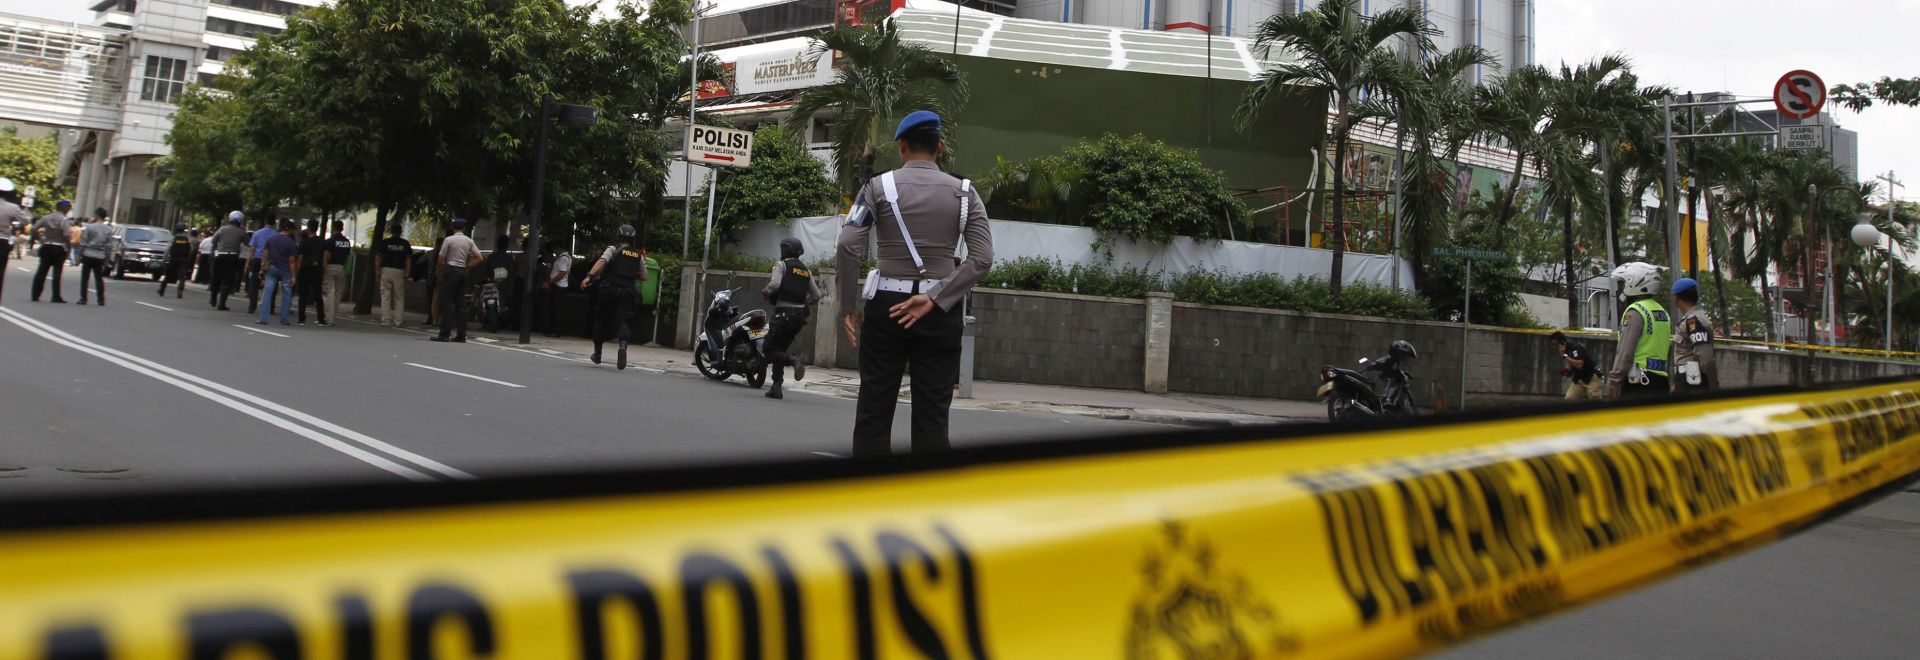 epa05100970 A general view shows a police cordon sealing off the scene of a bomb blast in Jakarta, Indonesia, 14 January 2016. Explosions near a shopping centre in the Indonesian capital Jakarta killed at least three people on Thursday, television reports and witnesses said.  Police exchanged fire with suspected attackers after the blasts at a traffic police post in front of the Sarinah shopping centre and a nearby Starbucks coffee shop, media reported.  EPA/RONI BINTANG AUSTRALIA AND NEW ZEALAND OUT